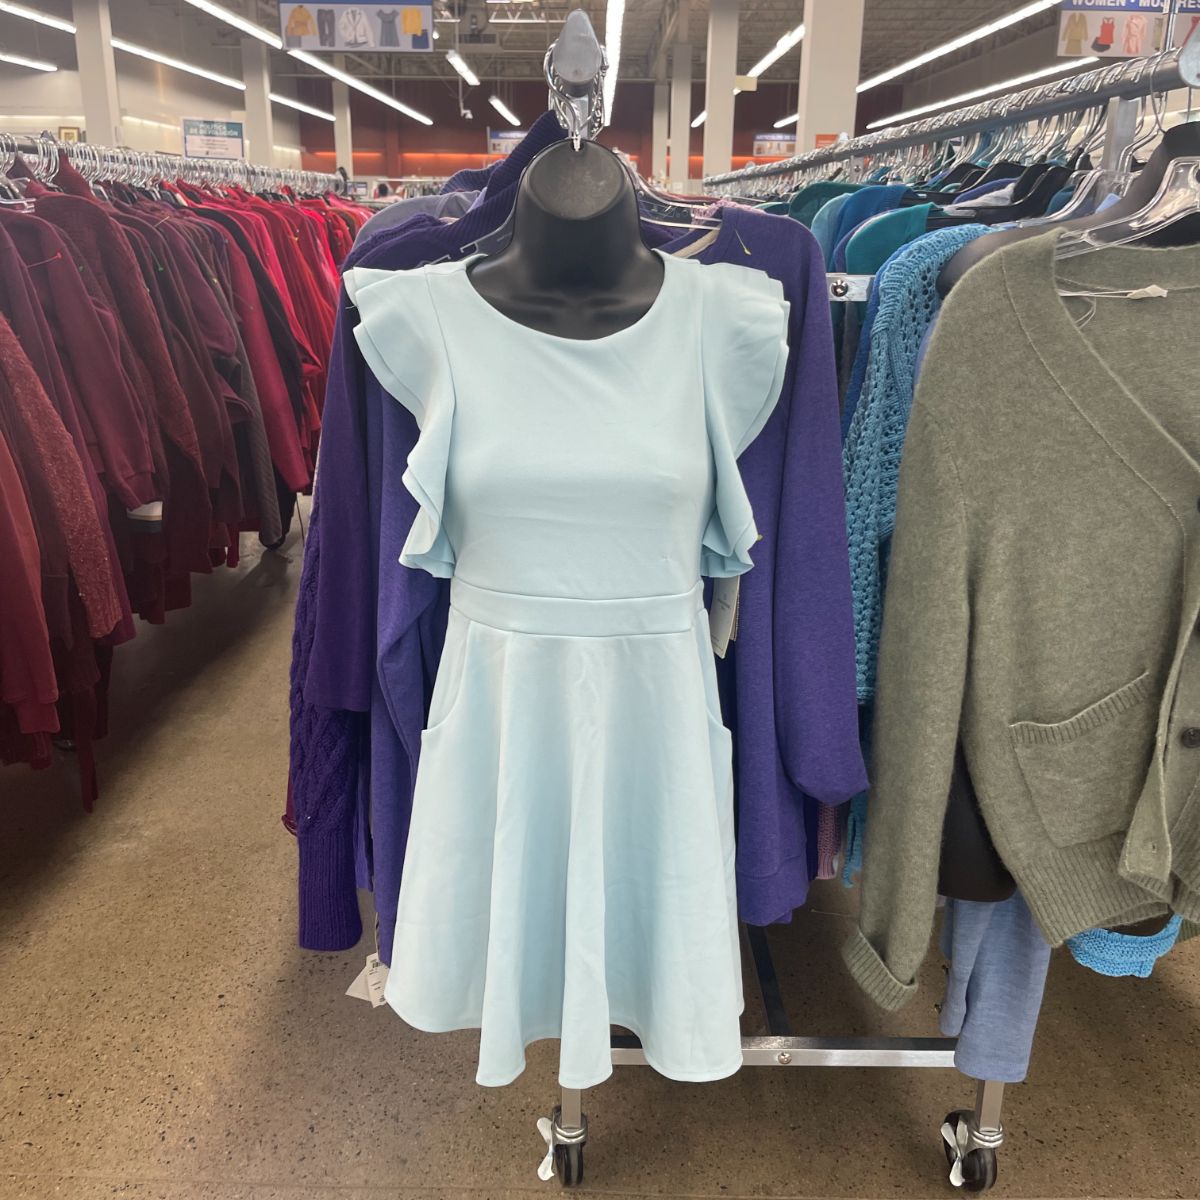 Spring has sprung! Celebrate the season of pastels by finding the perfect outfit at Goodwill! #ShopGoodwill #GoodwillFinds #GoodwillMA